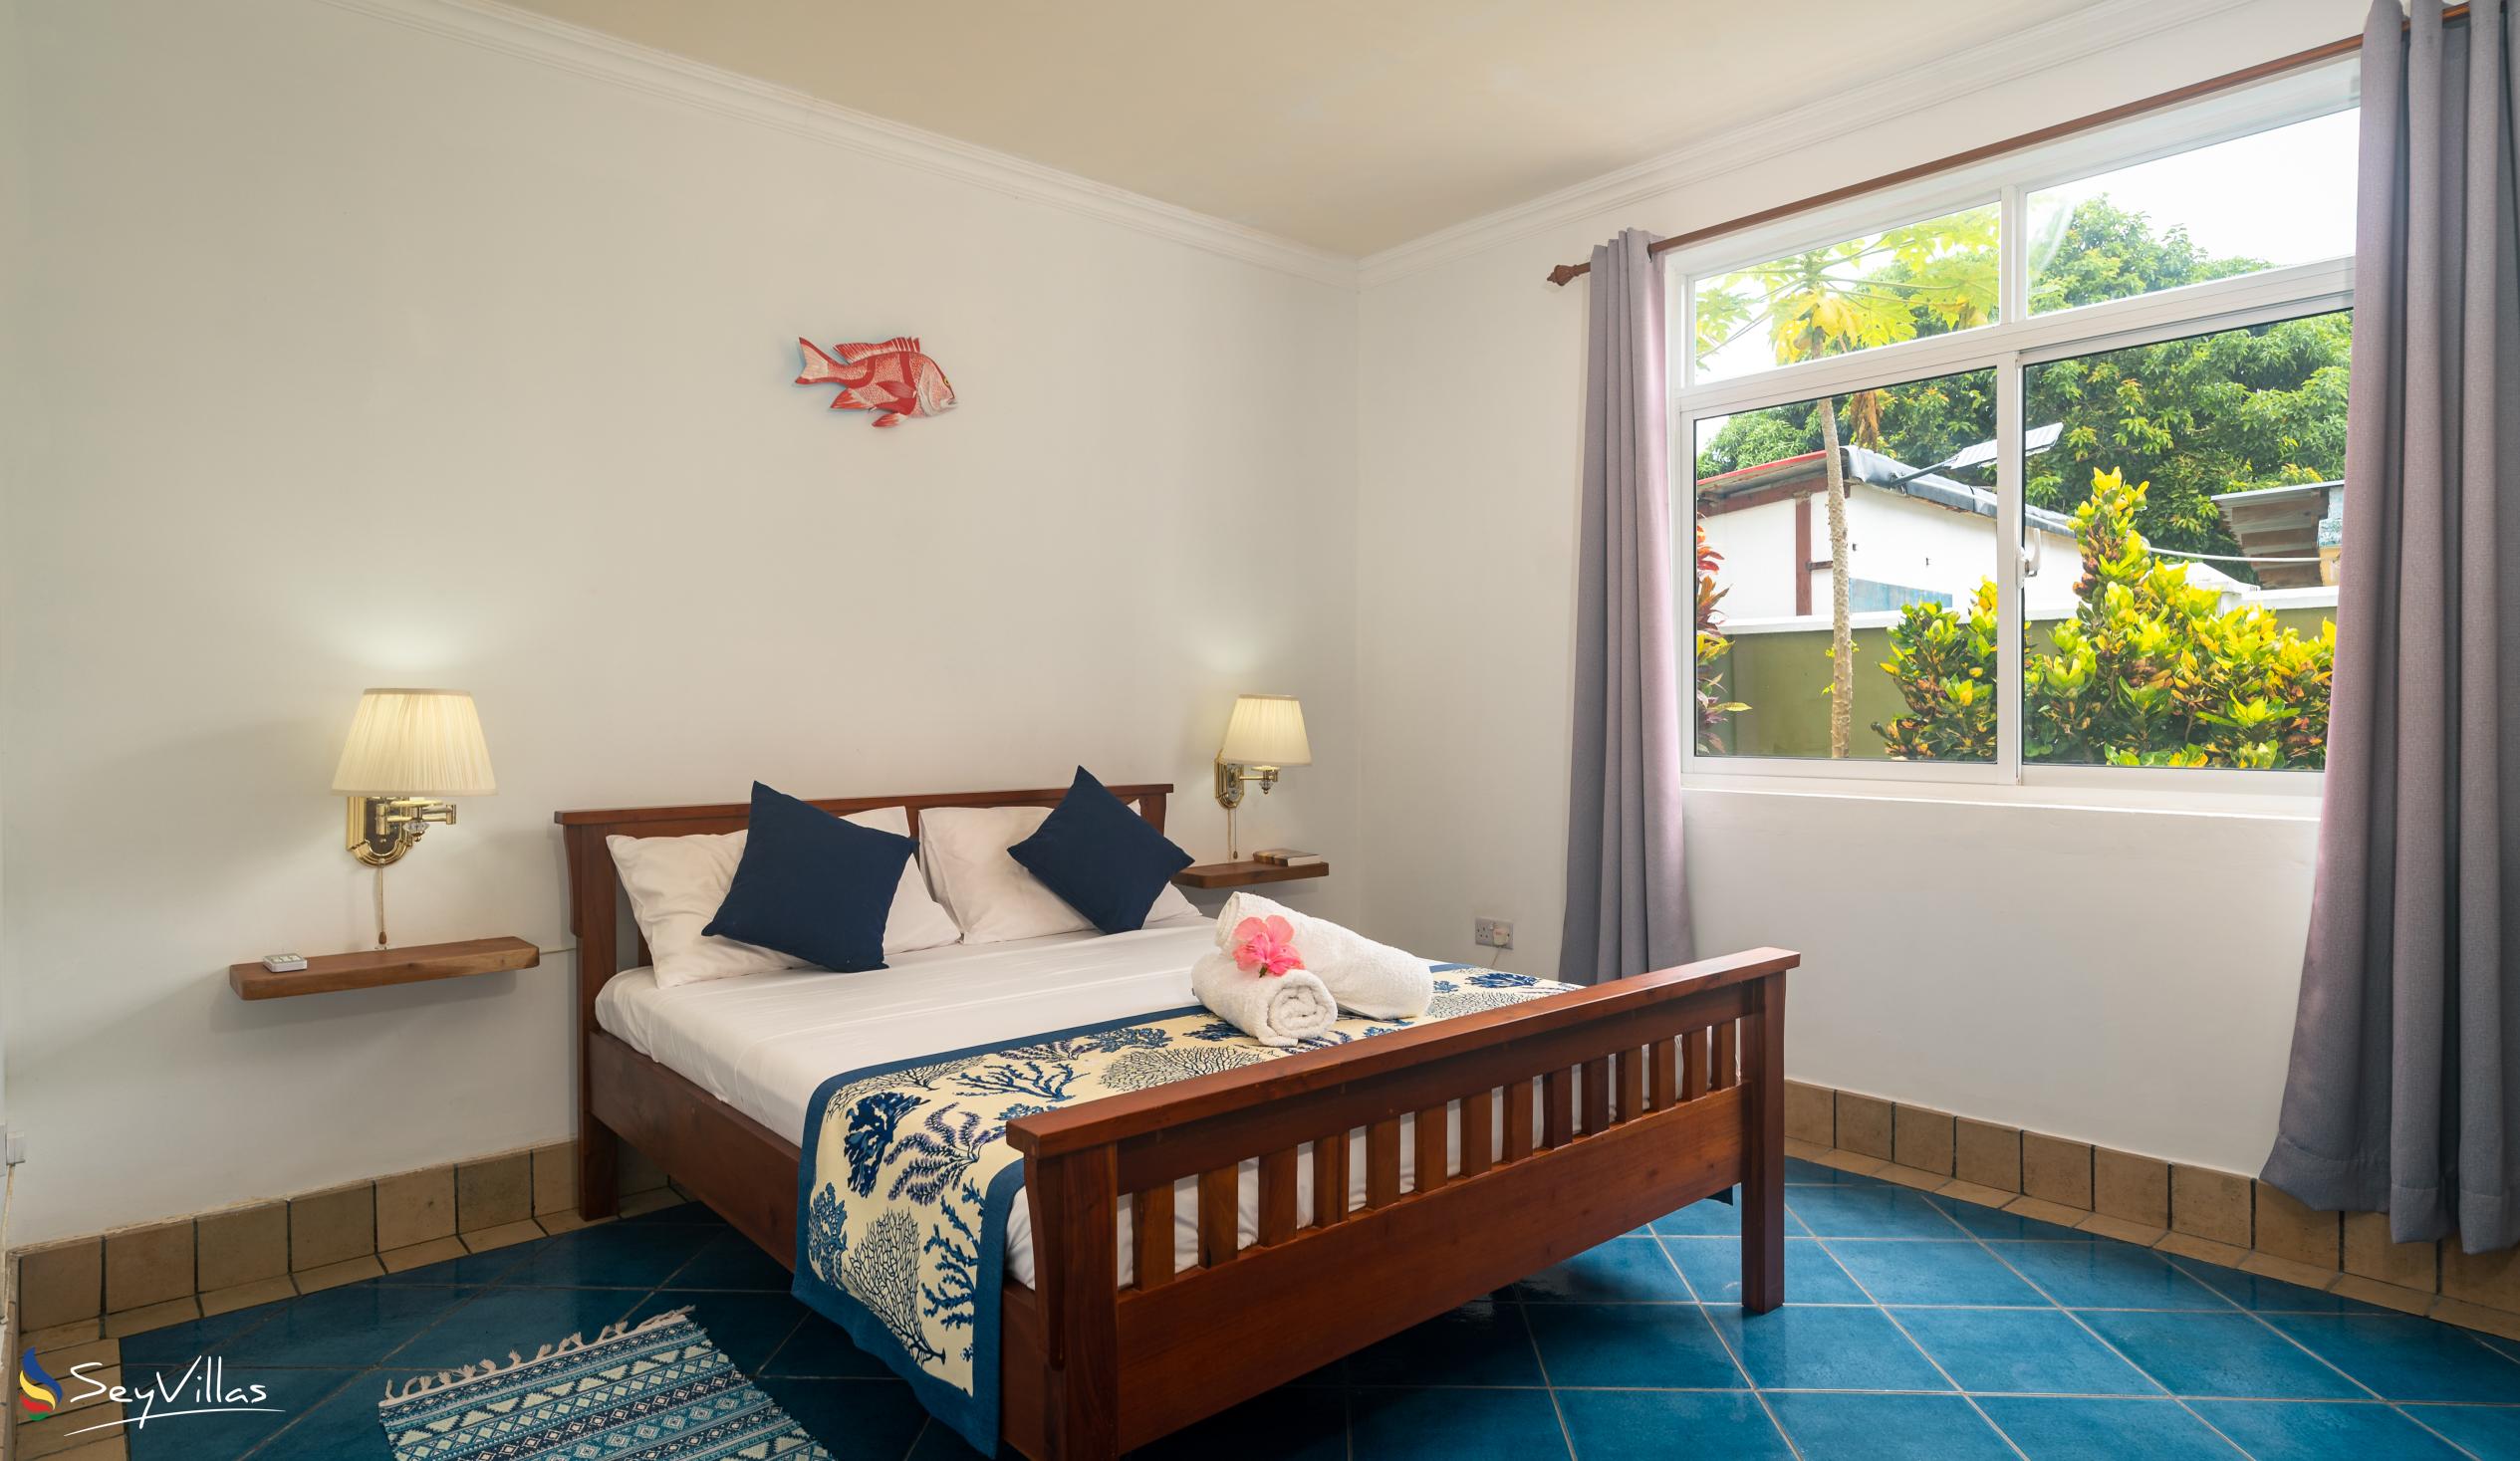 Photo 88: 340 Degrees Mountain View Apartments - Standard Double Room with Garden View - Mahé (Seychelles)